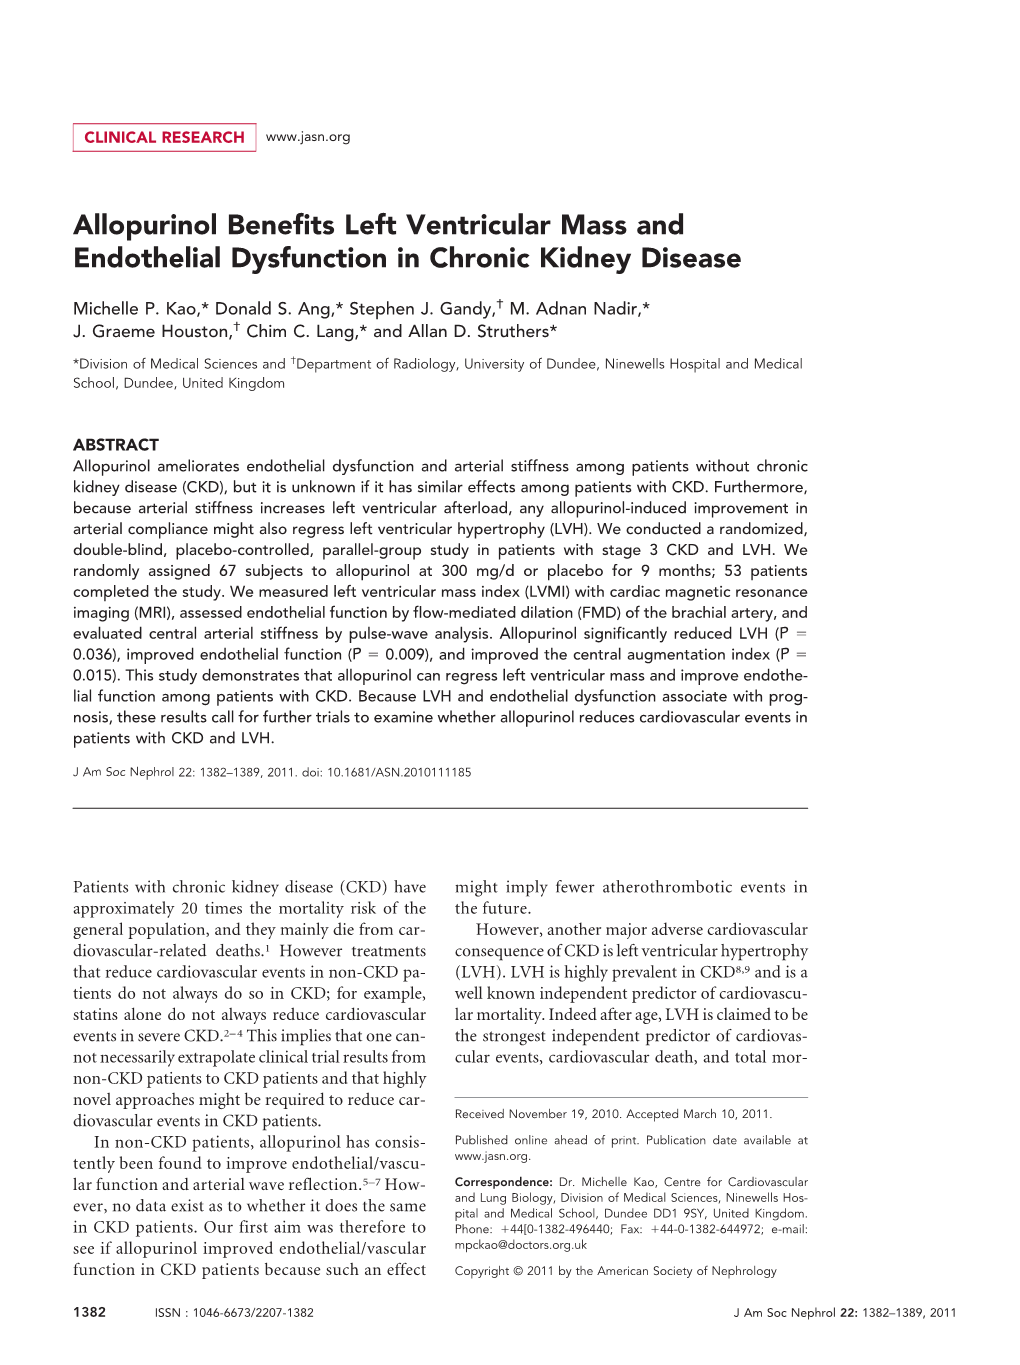 Allopurinol Benefits Left Ventricular Mass and Endothelial Dysfunction in Chronic Kidney Disease